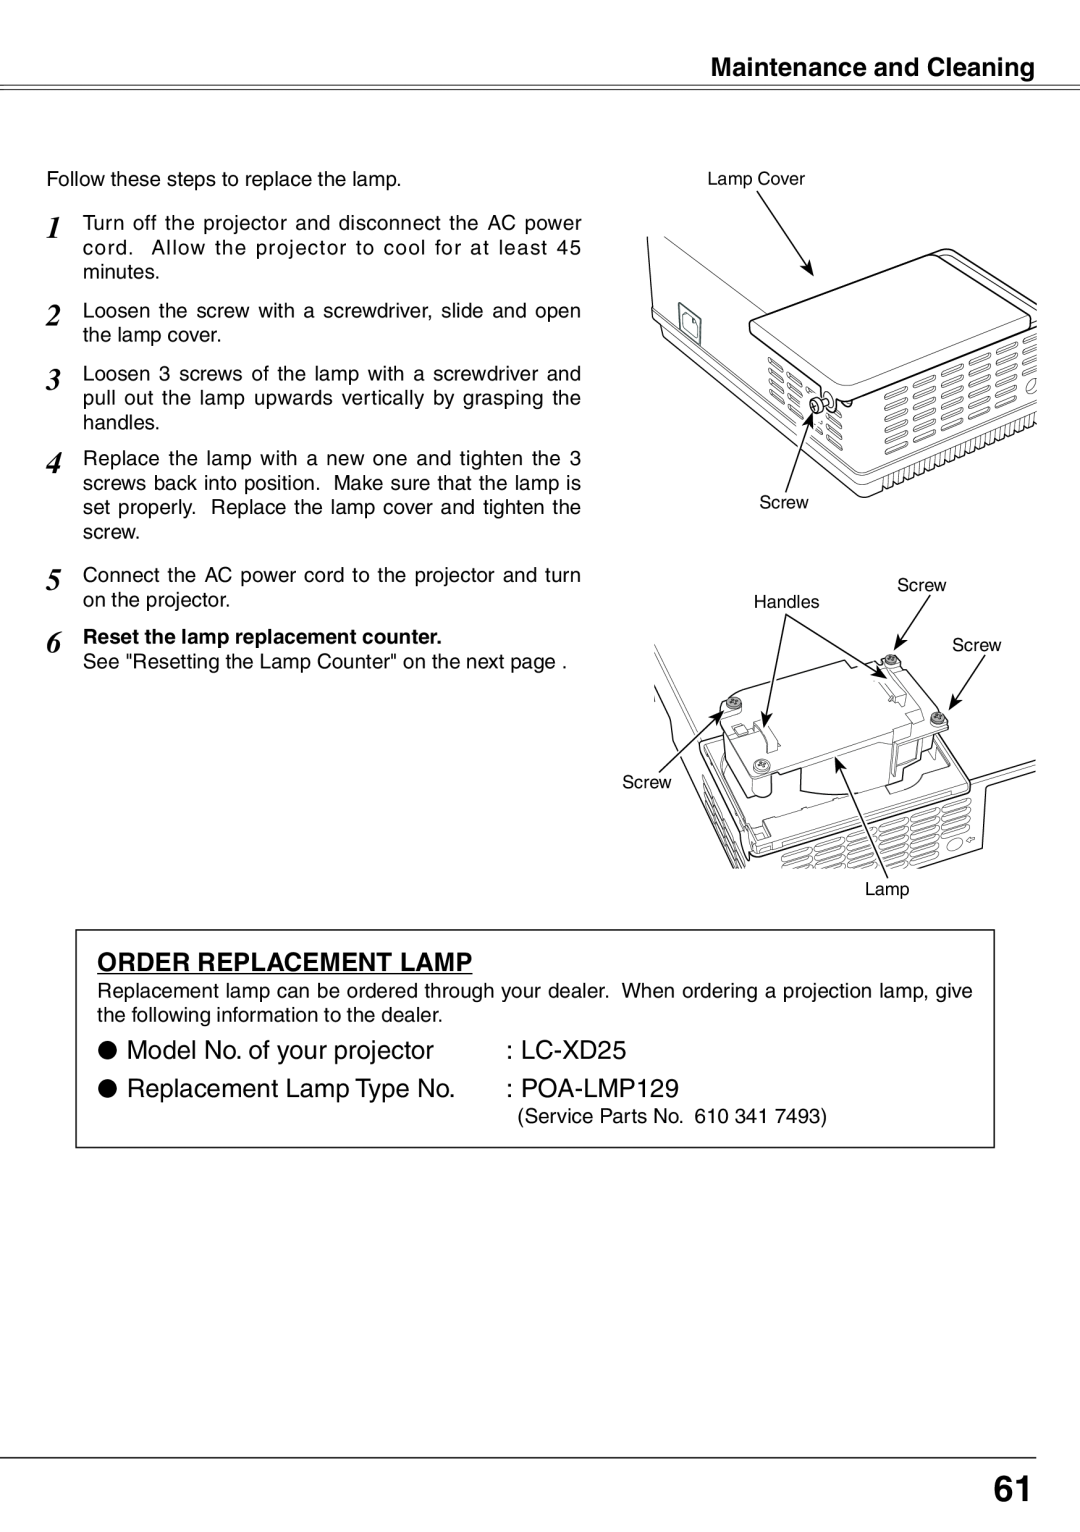 Eiki LC-XD25 owner manual Order Replacement Lamp, Model No. of your projector, Replacement Lamp Type No, POA-LMP129 